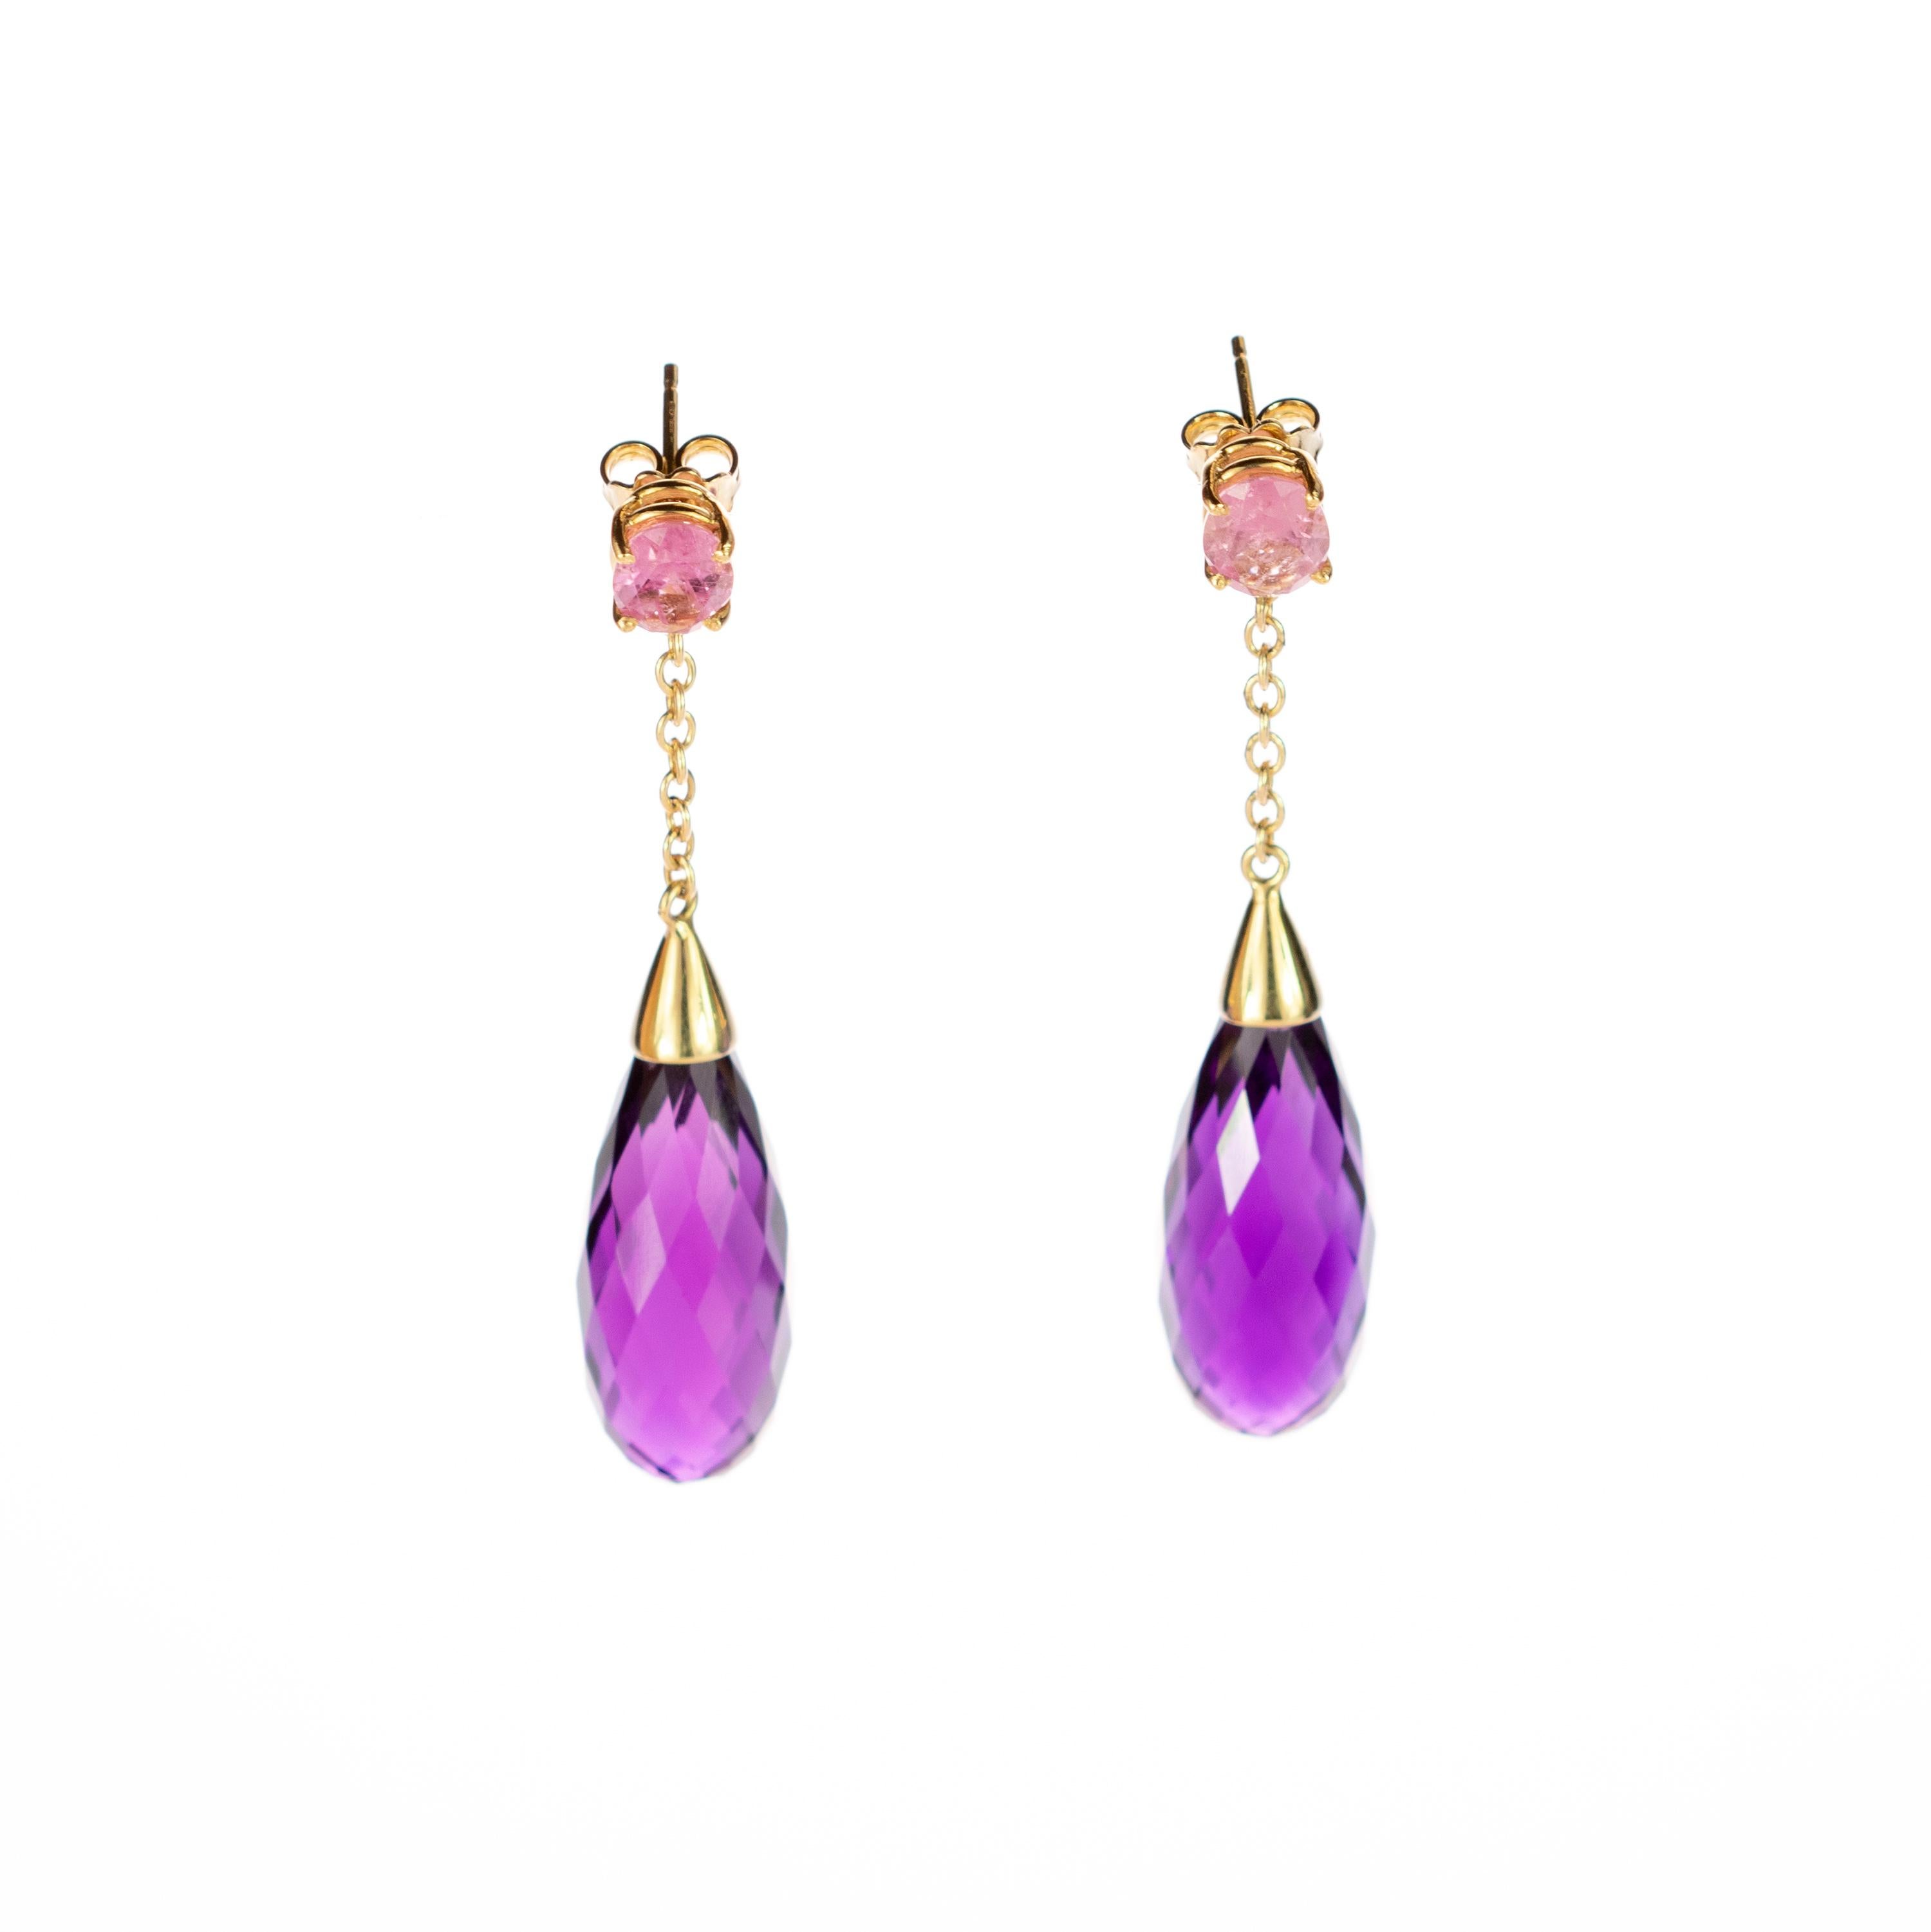 An enchanted radiant round and 8 carats light pink tourmaline earrings held by an 18 karat yellow gold delicate chain to a deep purple 51.5 carats amethyst briolette tear. Modern tear designs jewels that combine voluminous shapes with vivid colours,